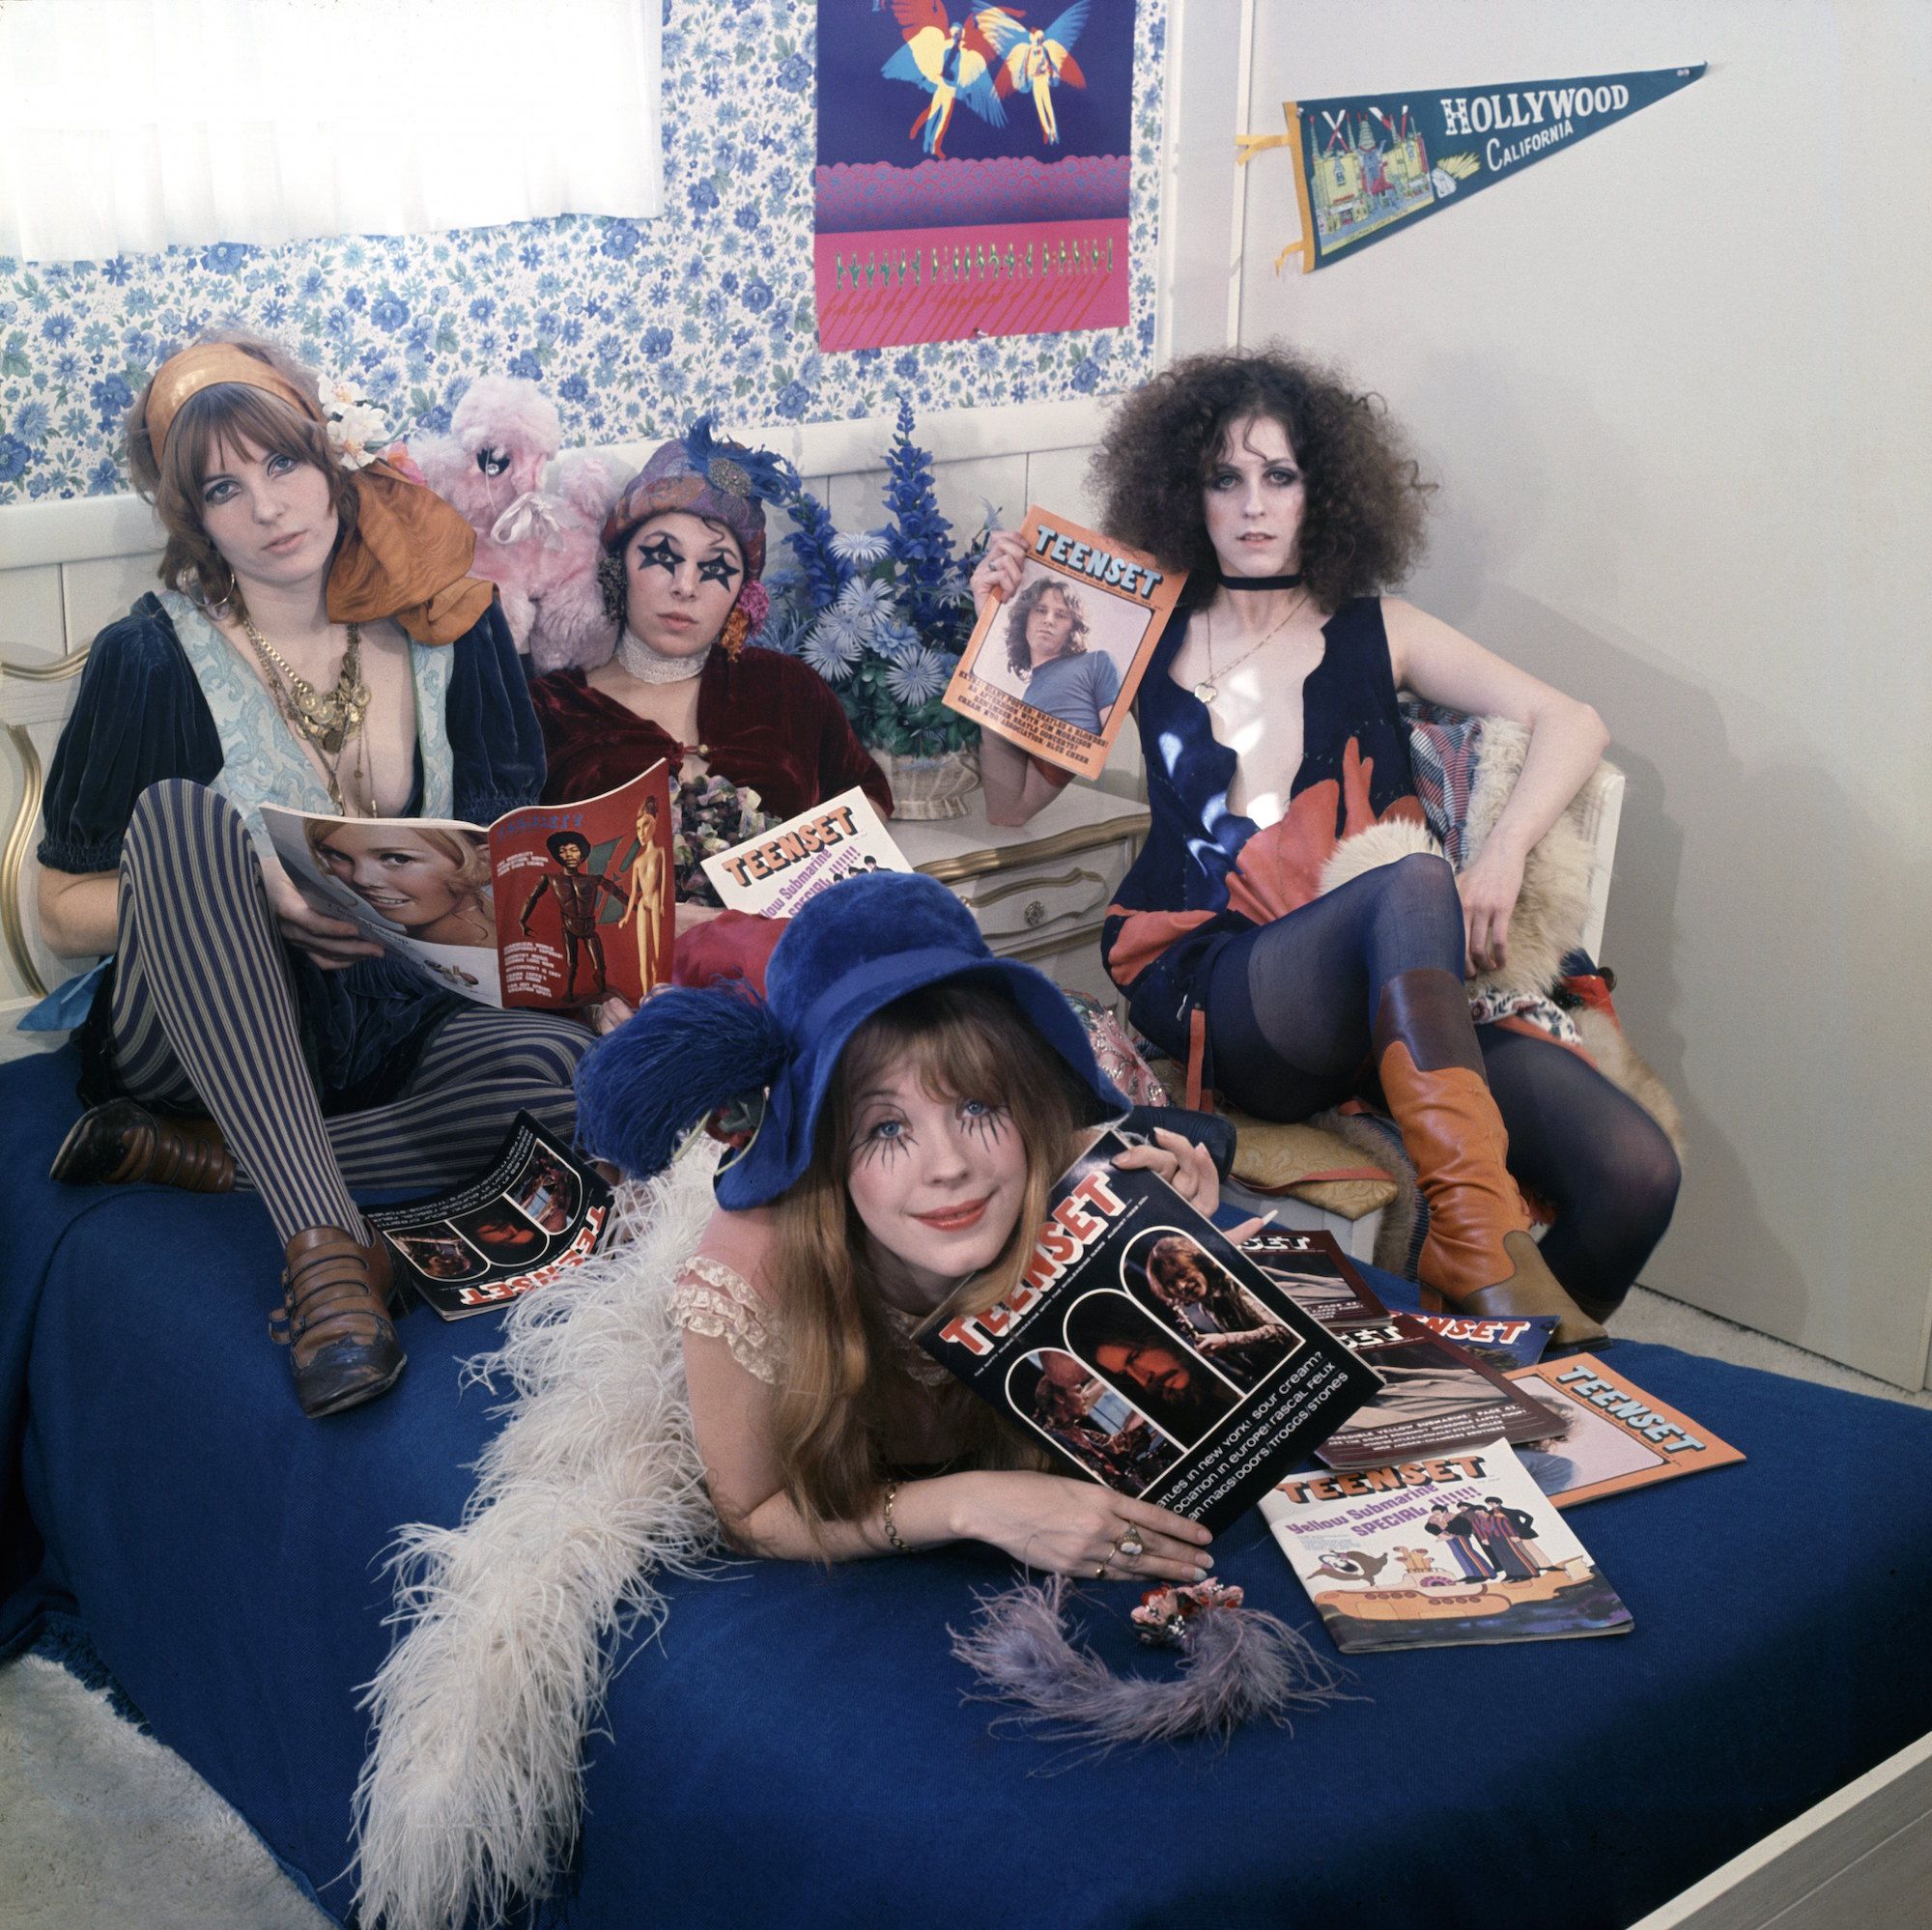 los angeles   january 14  pop group and goupies the gtos girls together outrageously l r miss cynderella, miss sandra, and miss christine, miss pamela is in the front pose for teenset magazine cover on january 14, 1969 in los angeles, california photo by ed caraeffgetty images